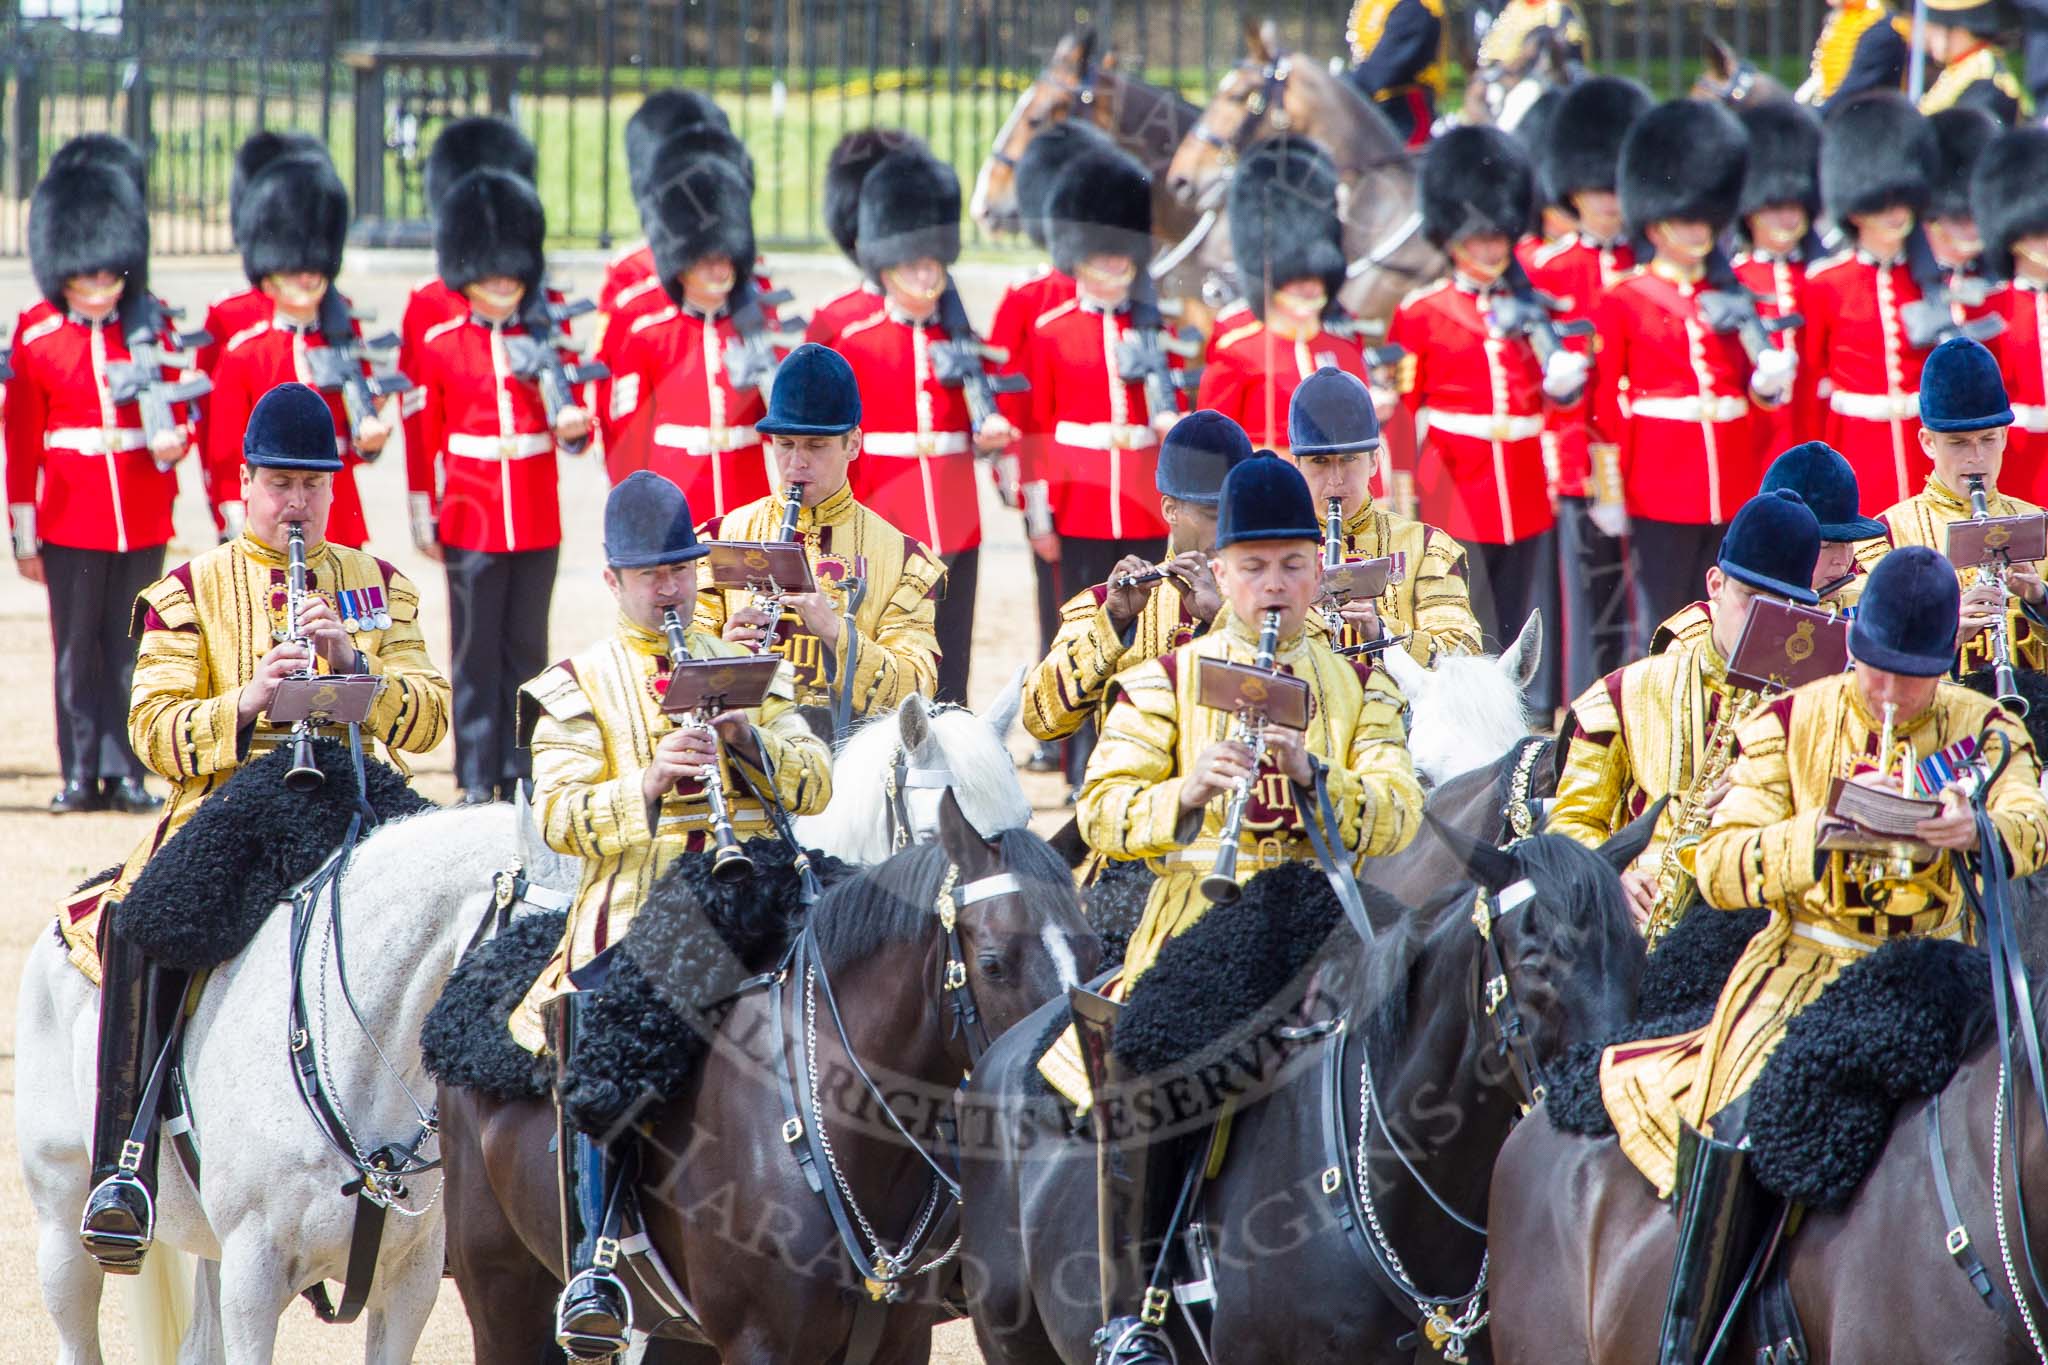 Trooping the Colour 2013: The Mounted Bands of the Household Cavalry during the Ride Past. Image #711, 15 June 2013 11:57 Horse Guards Parade, London, UK